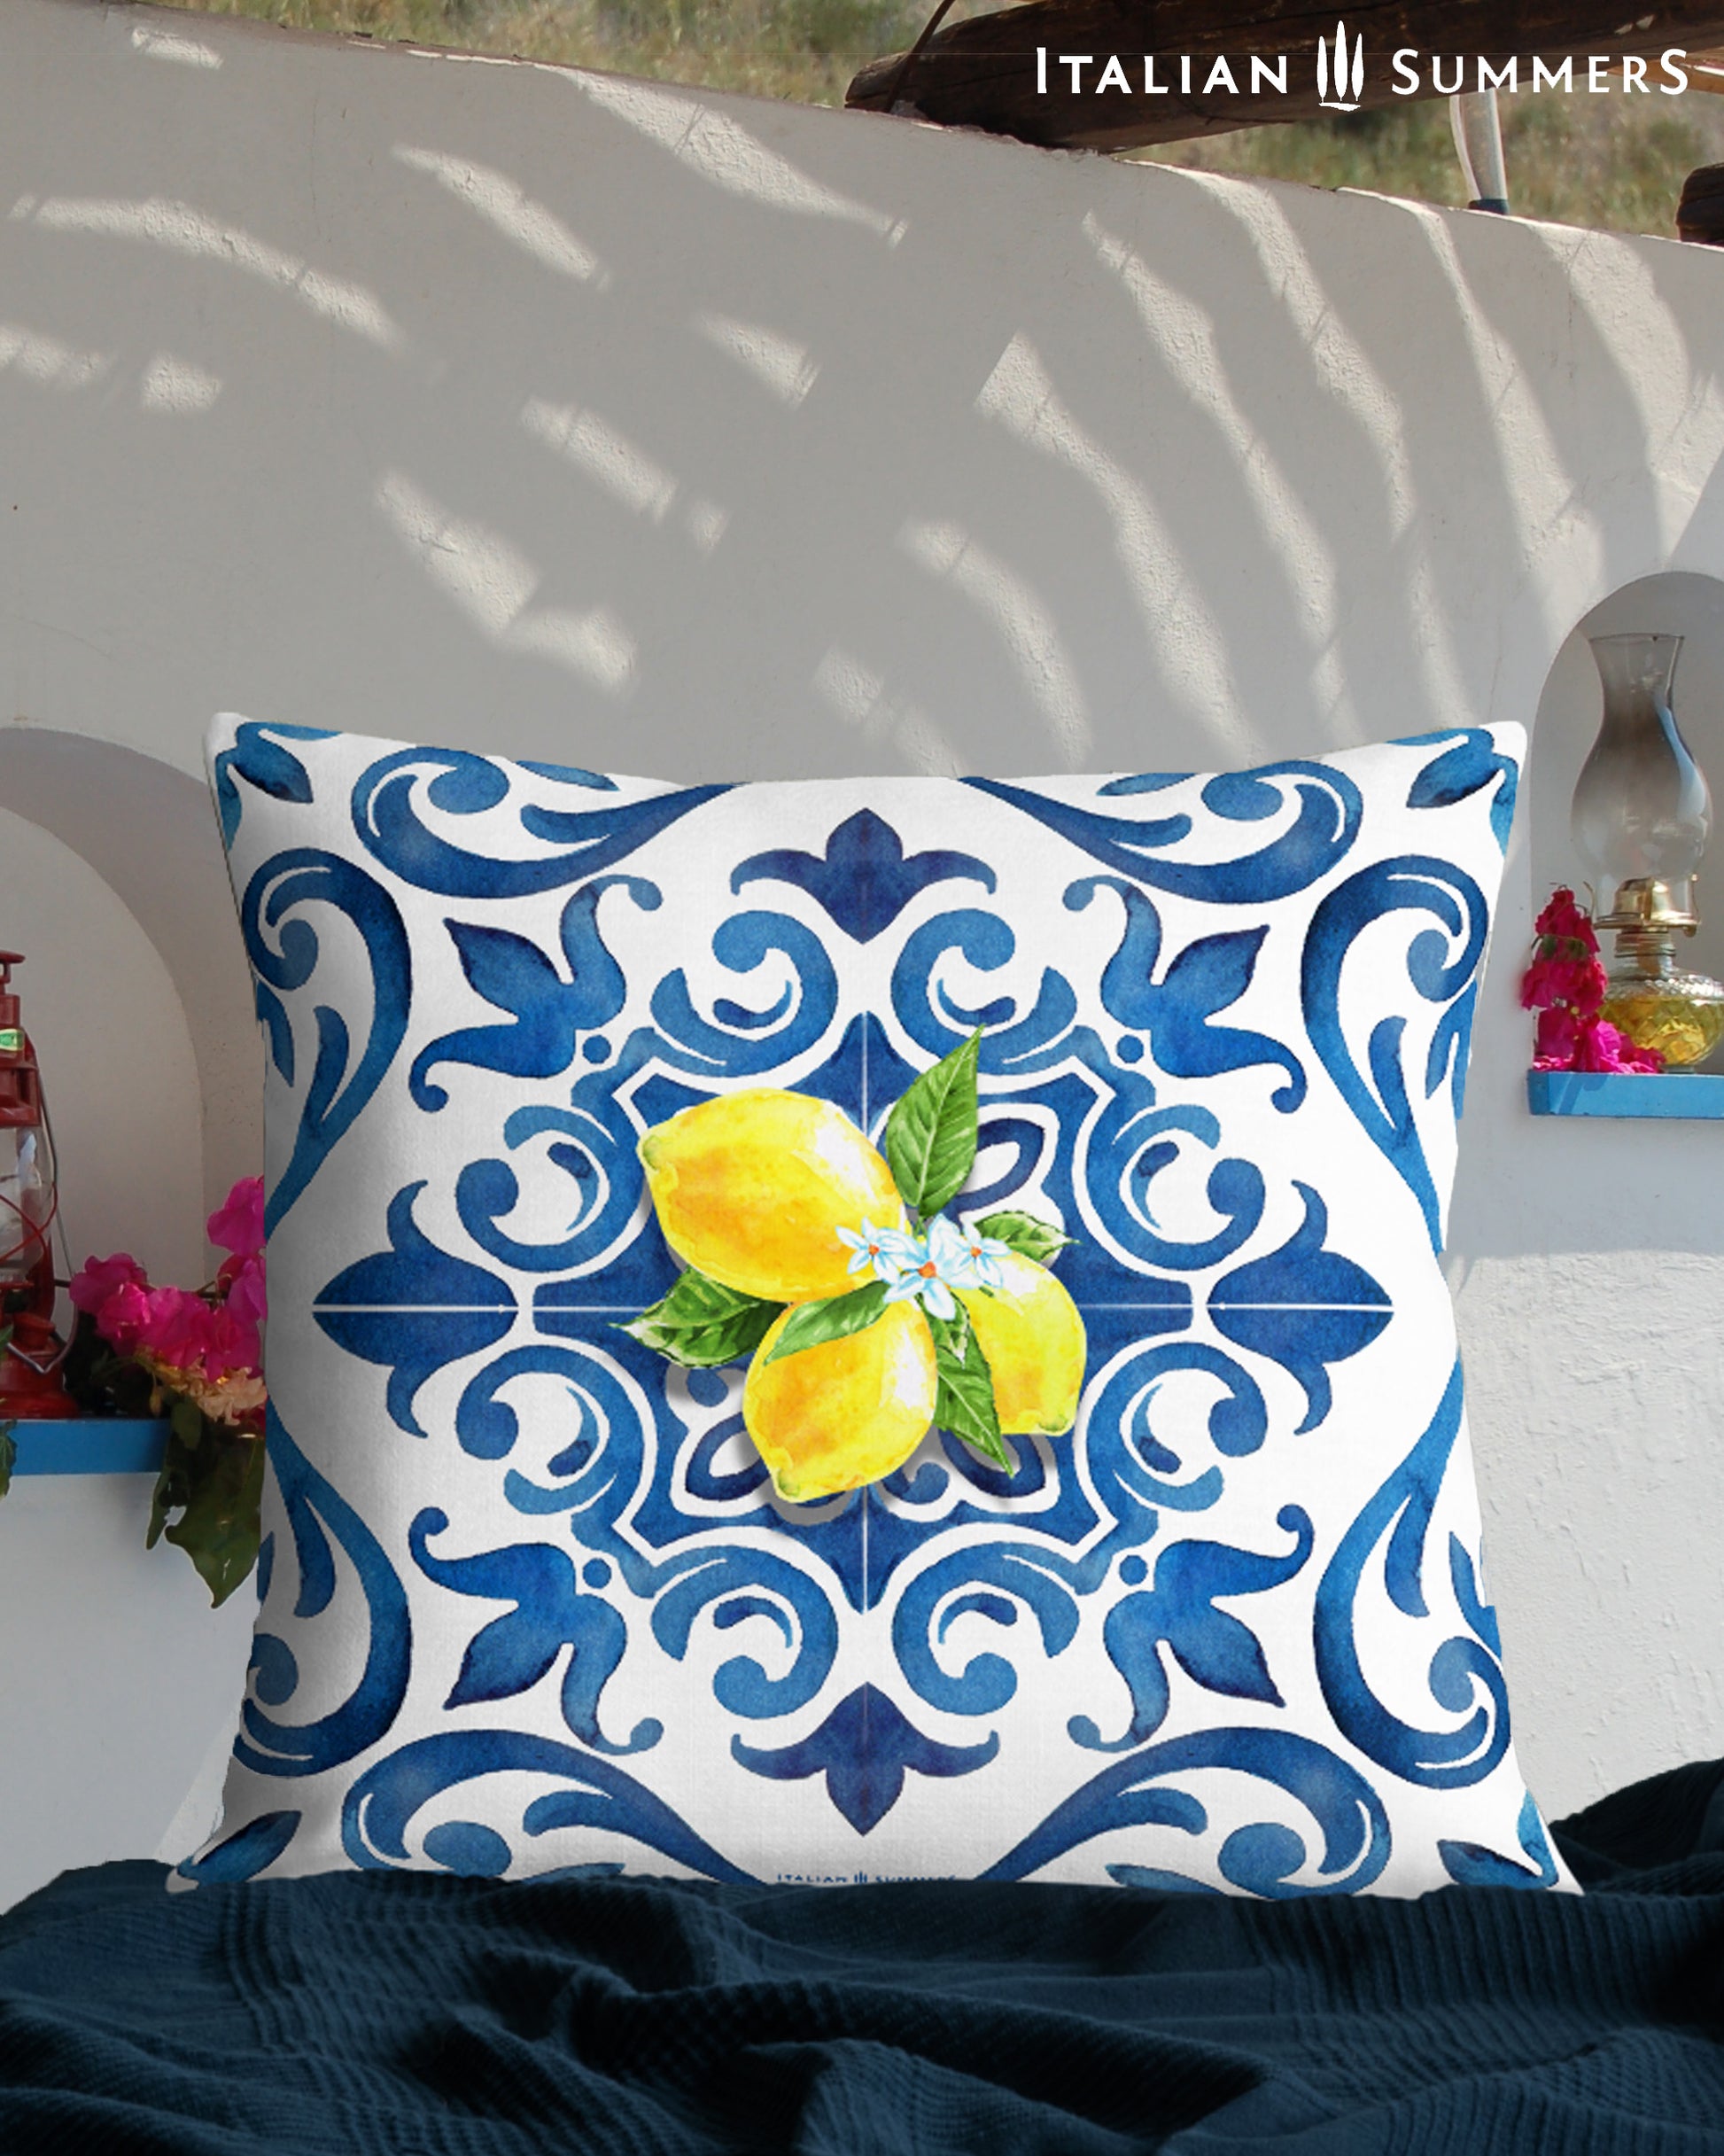 Italy inspired square pillow printed with a big blue white tile. In the center of the tile there is a bundle of big Sorrento lemons. Gives a true Italian summer feeling to your livingroom or terras. Made by Italian Summers.